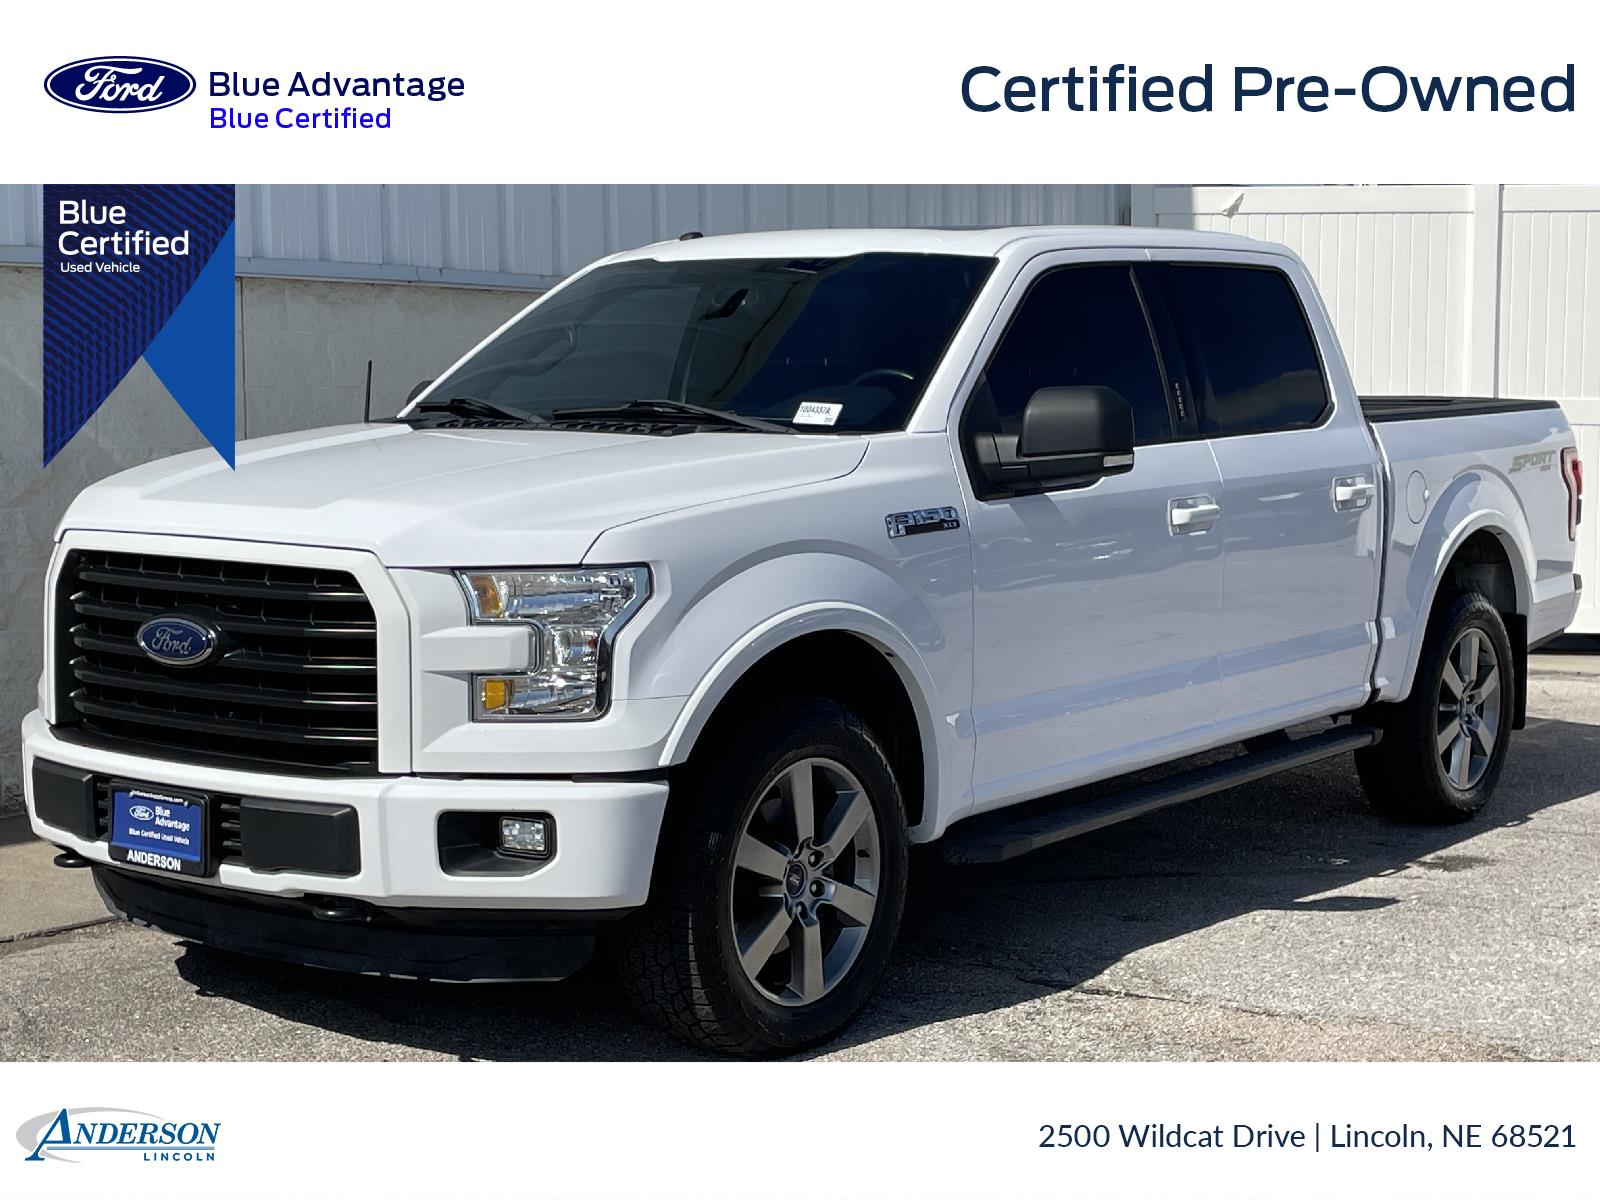 Used 2016 Ford F-150 XLT Stock: 1004337A